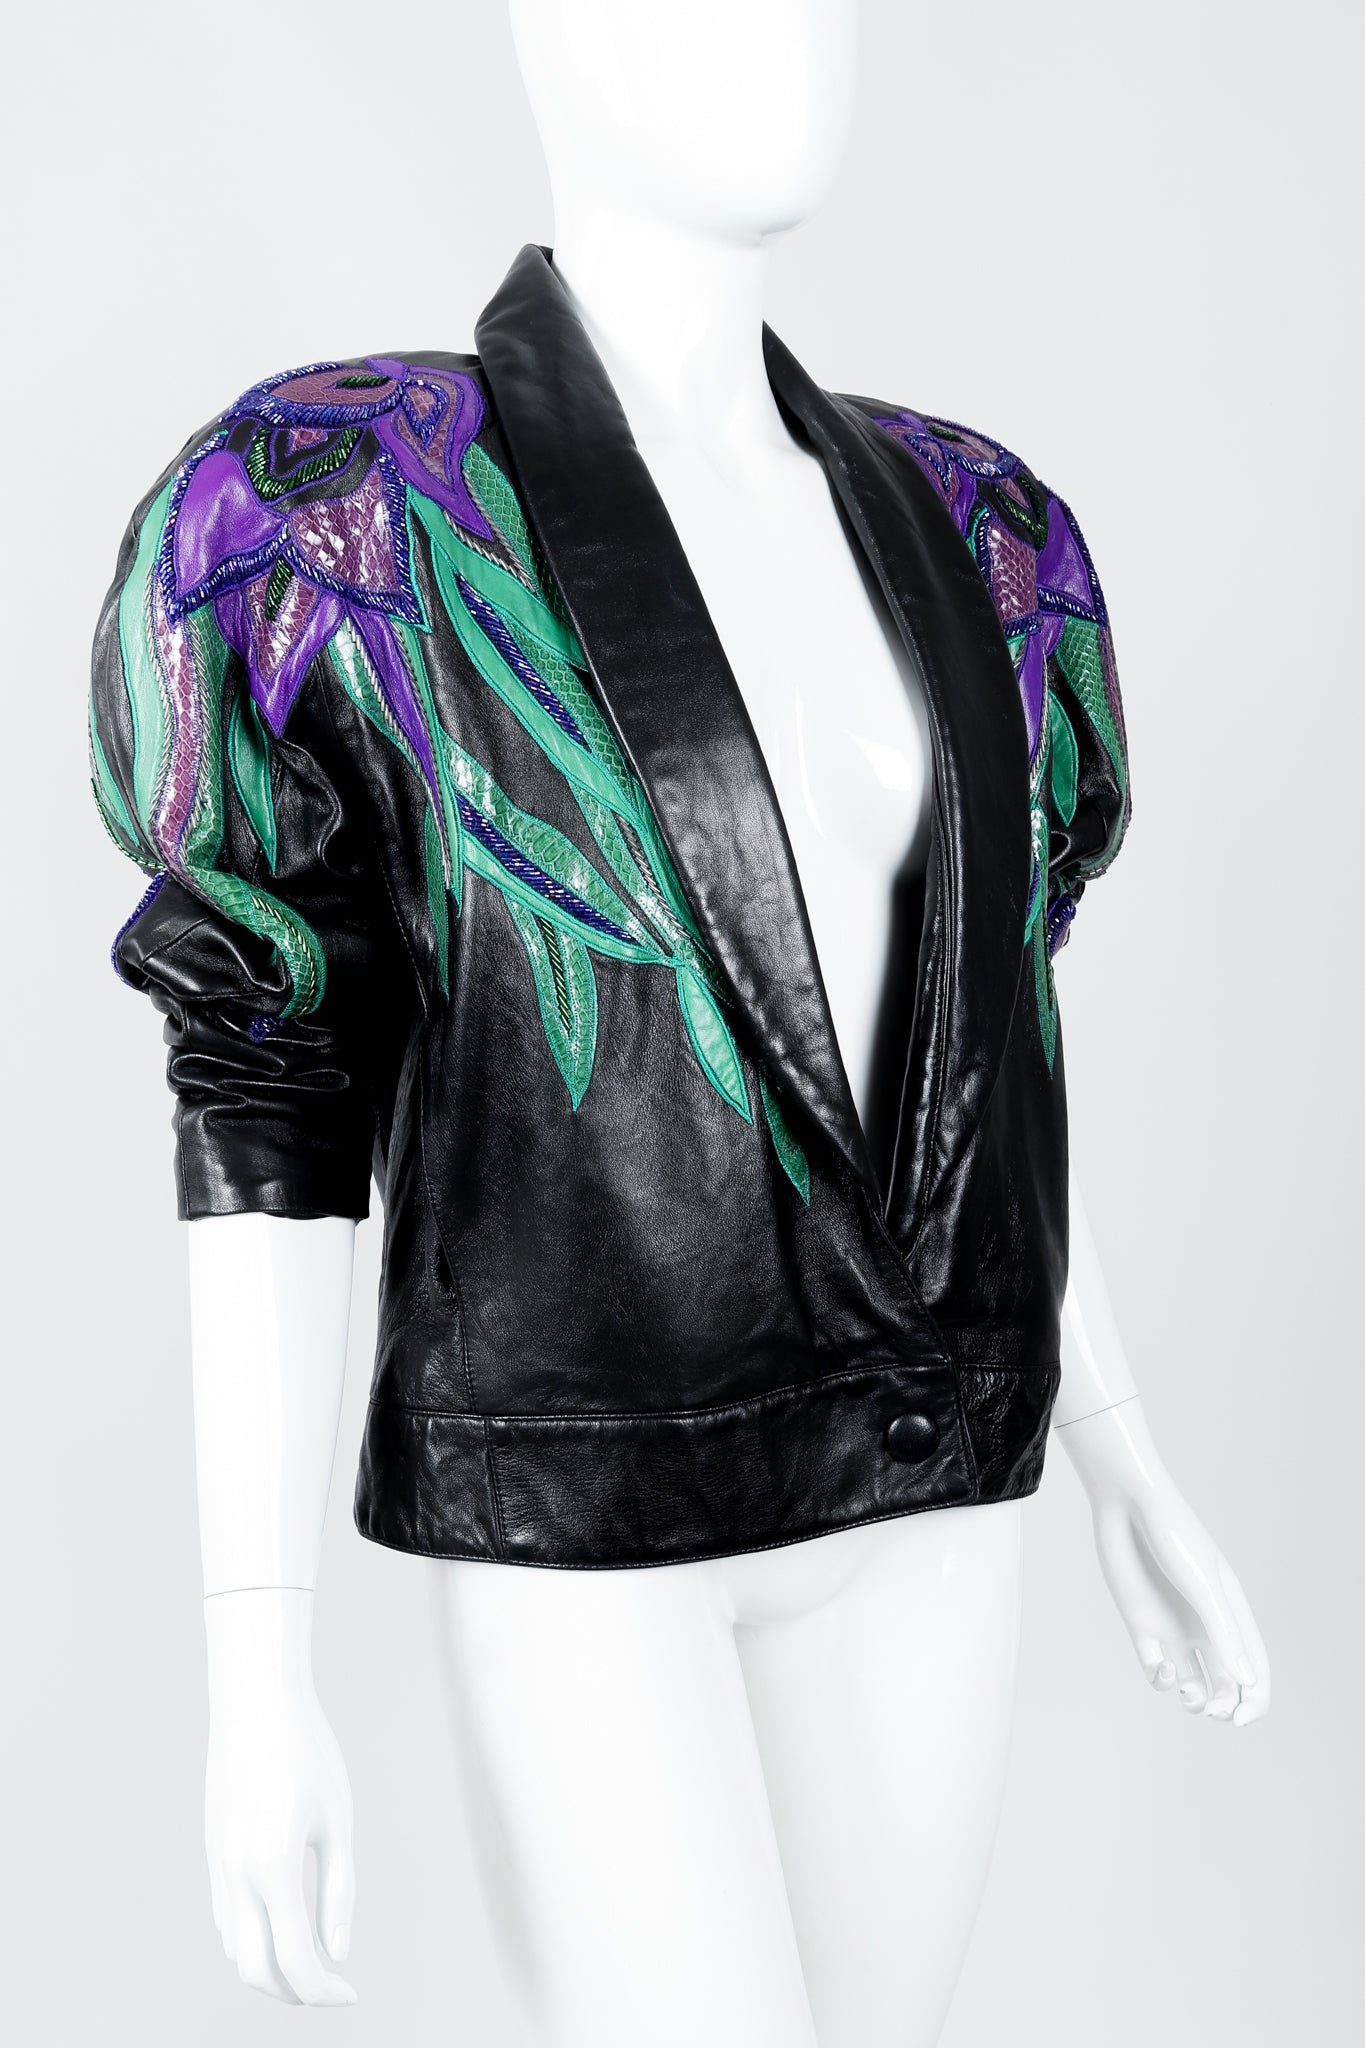 Vintage Erez Flaming Iris Leather Jacket styled angled on Mannequin at Recess